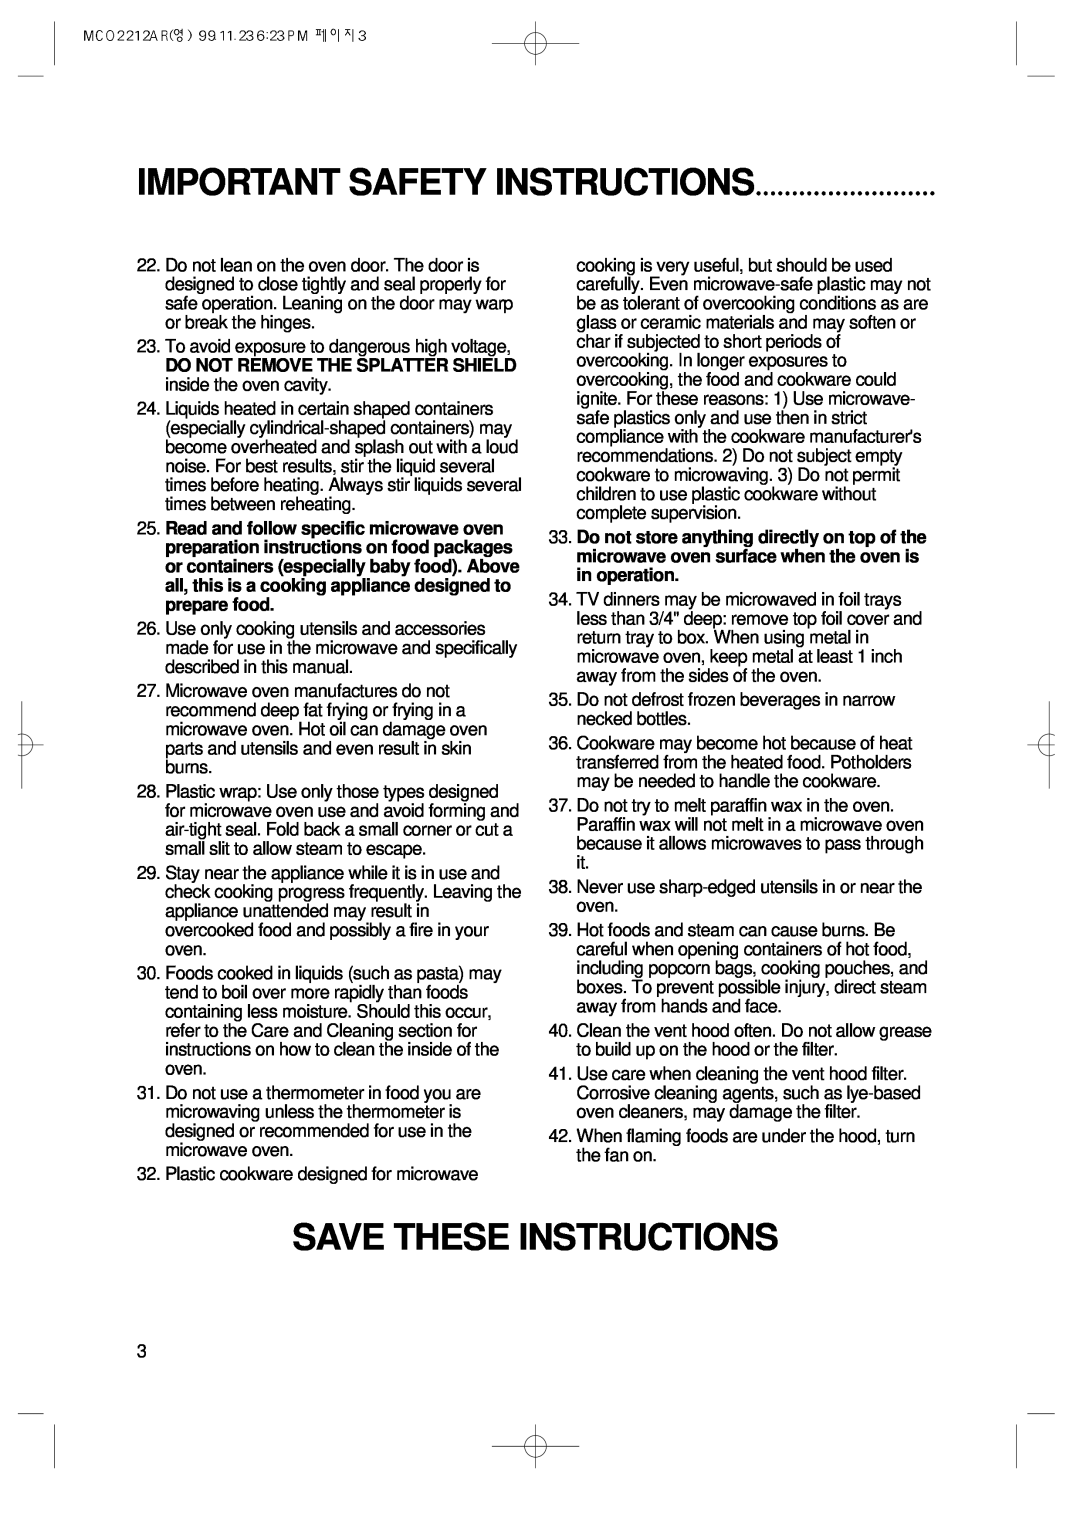 Magic Chef MCO2212AR manual Save These Instructions, Important Safety Instructions 